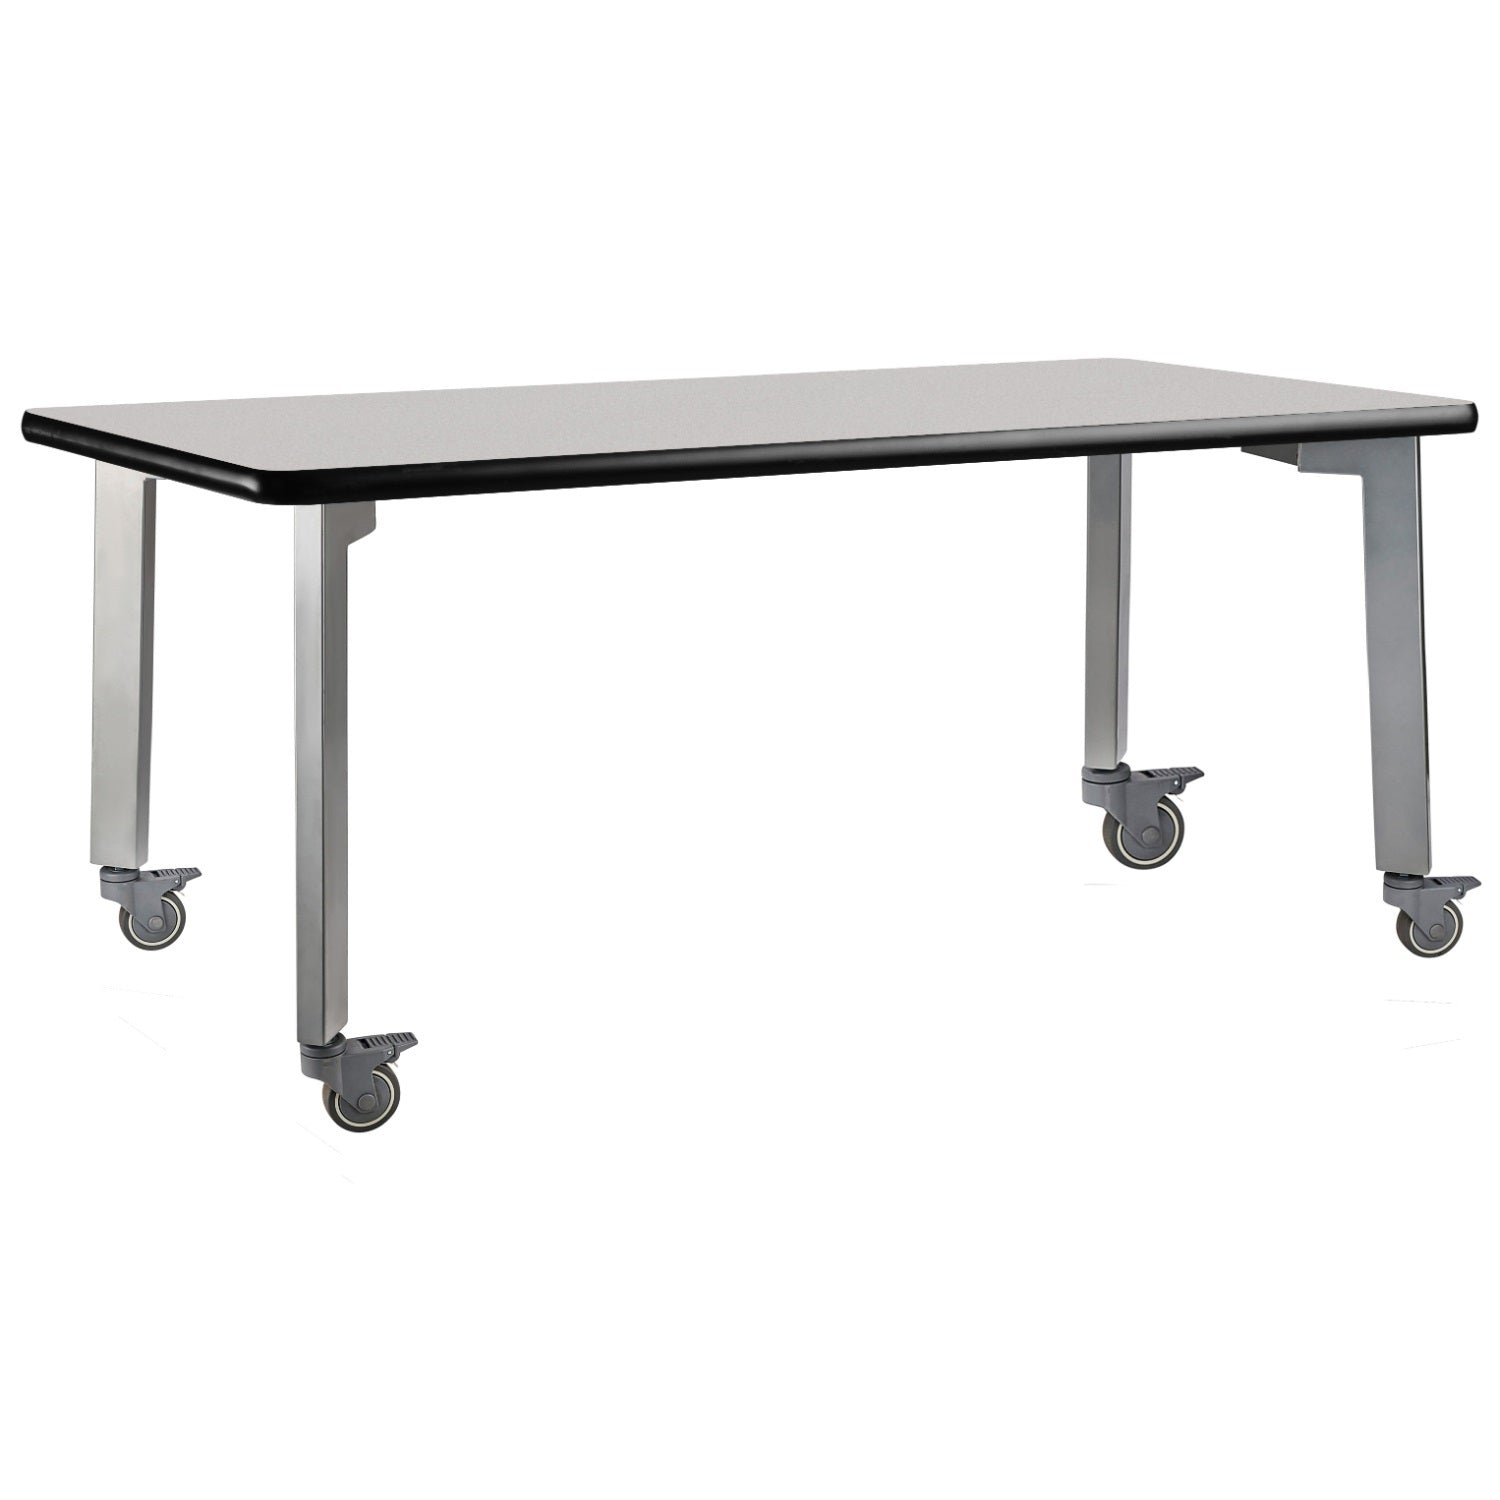 Titan Mobile Table, 36" x 36", Supreme High Pressure Laminate Top with MDF Core and ProtectEdge